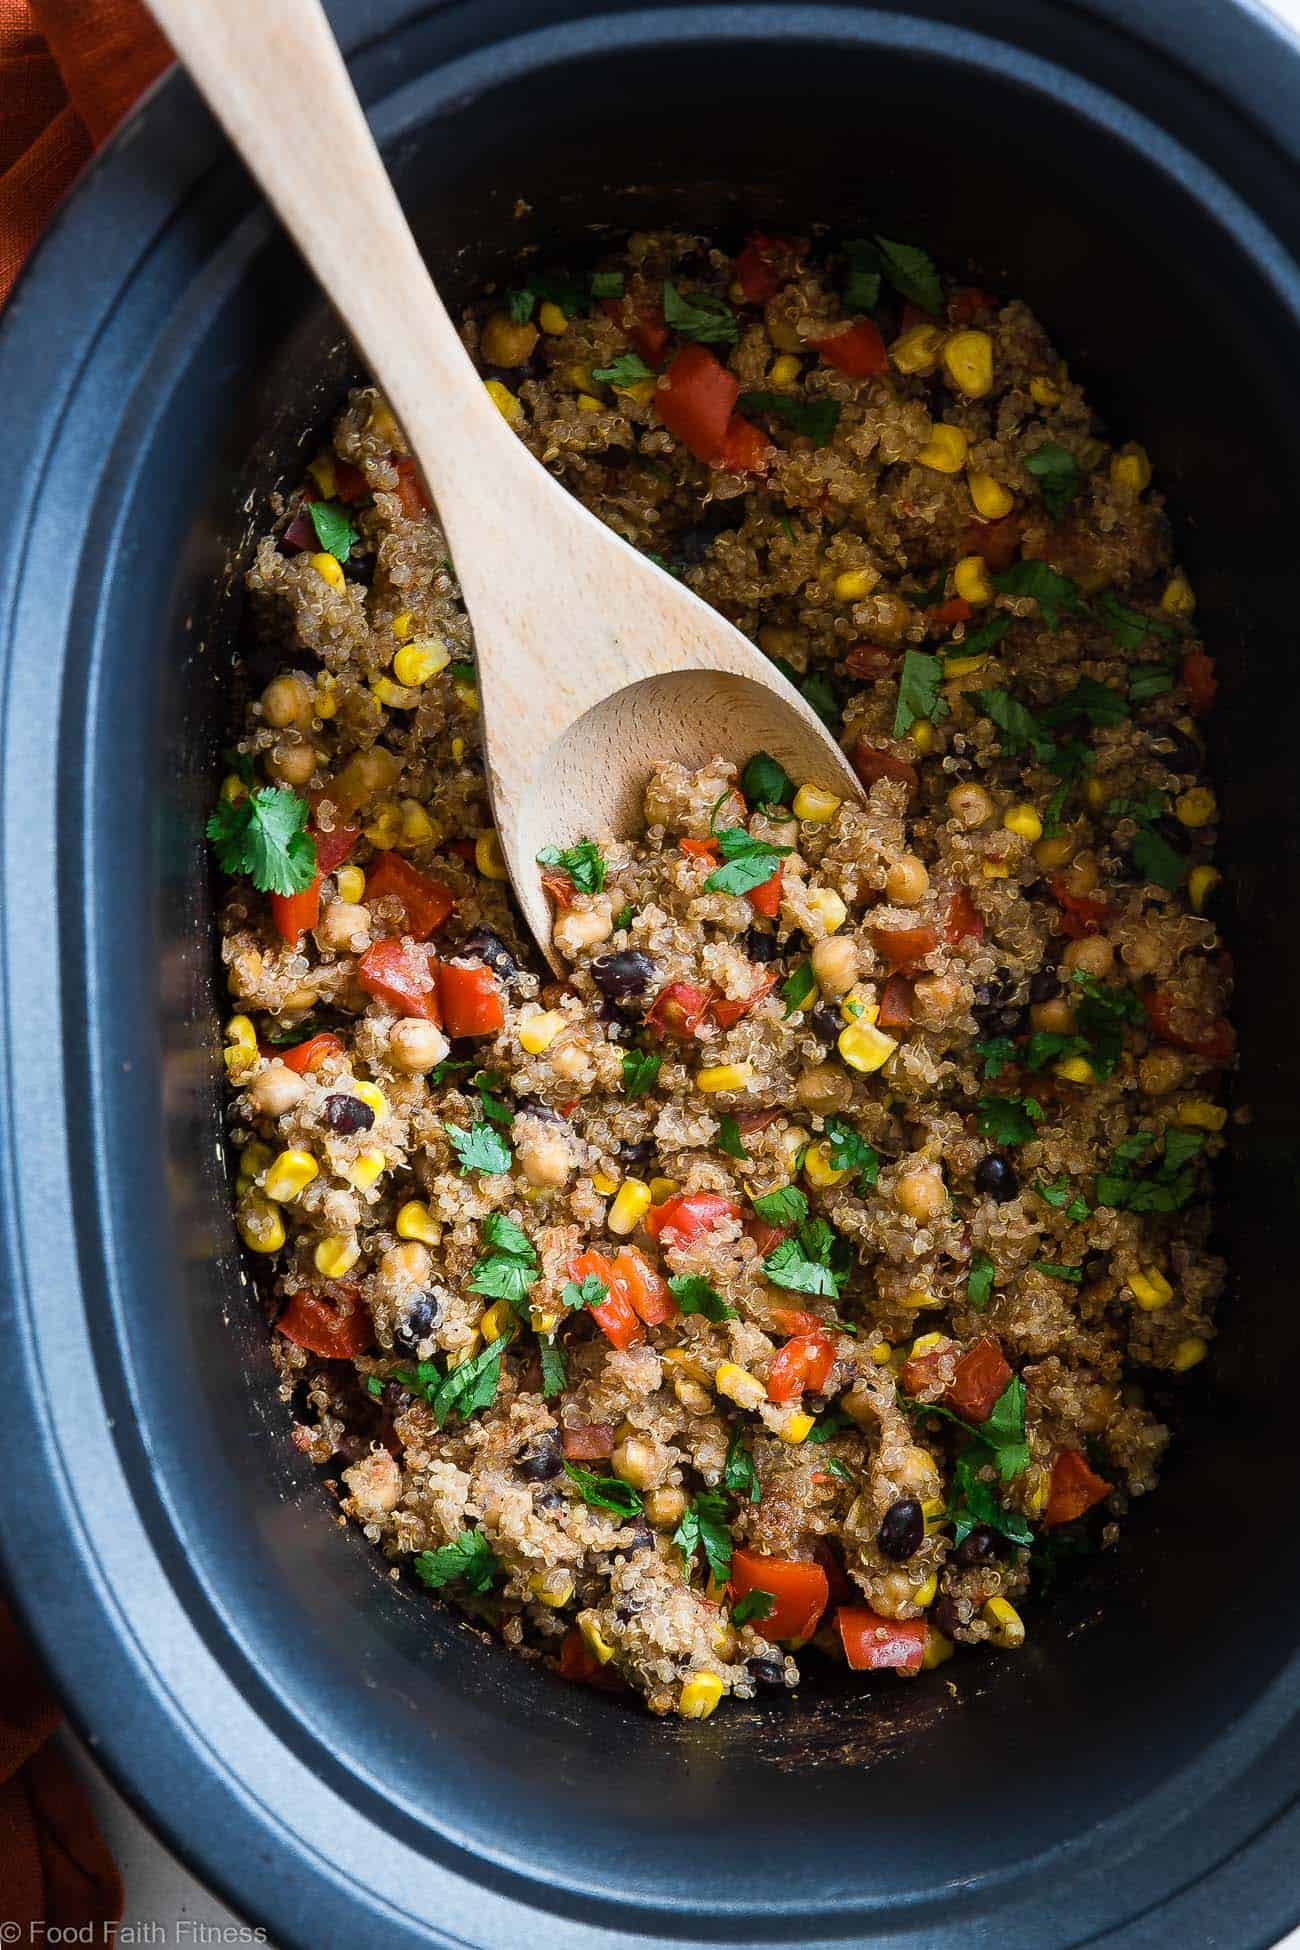 One Pan Mexican Quinoa Casserole - Let the slow cooker do the work for you with this family friendly, healthy weeknight dinner!  Gluten free with a vegan option and even picky eaters love it! | #FoodFaithFitness | #Quinoa #Glutenfree #Healthy #Vegan #Vegetarian